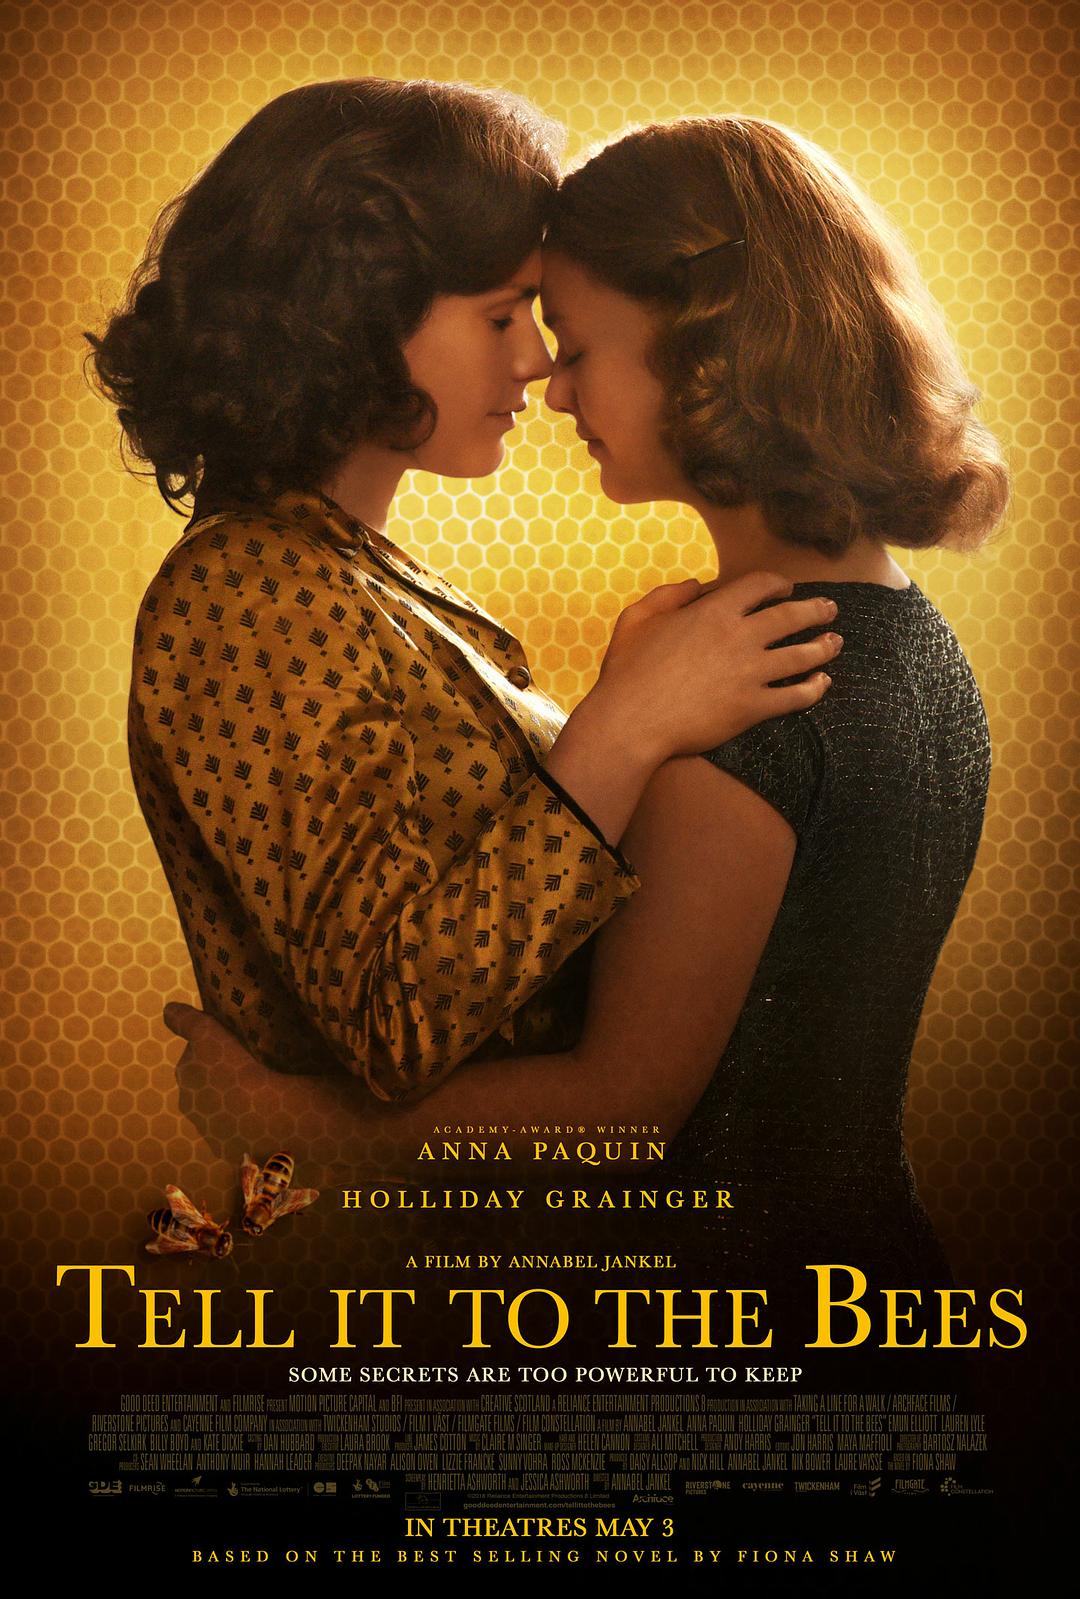 ۷/? Tell.It.to.the.Bees.2018.720p.BluRay.x264-GETiT 4.37GB-1.png